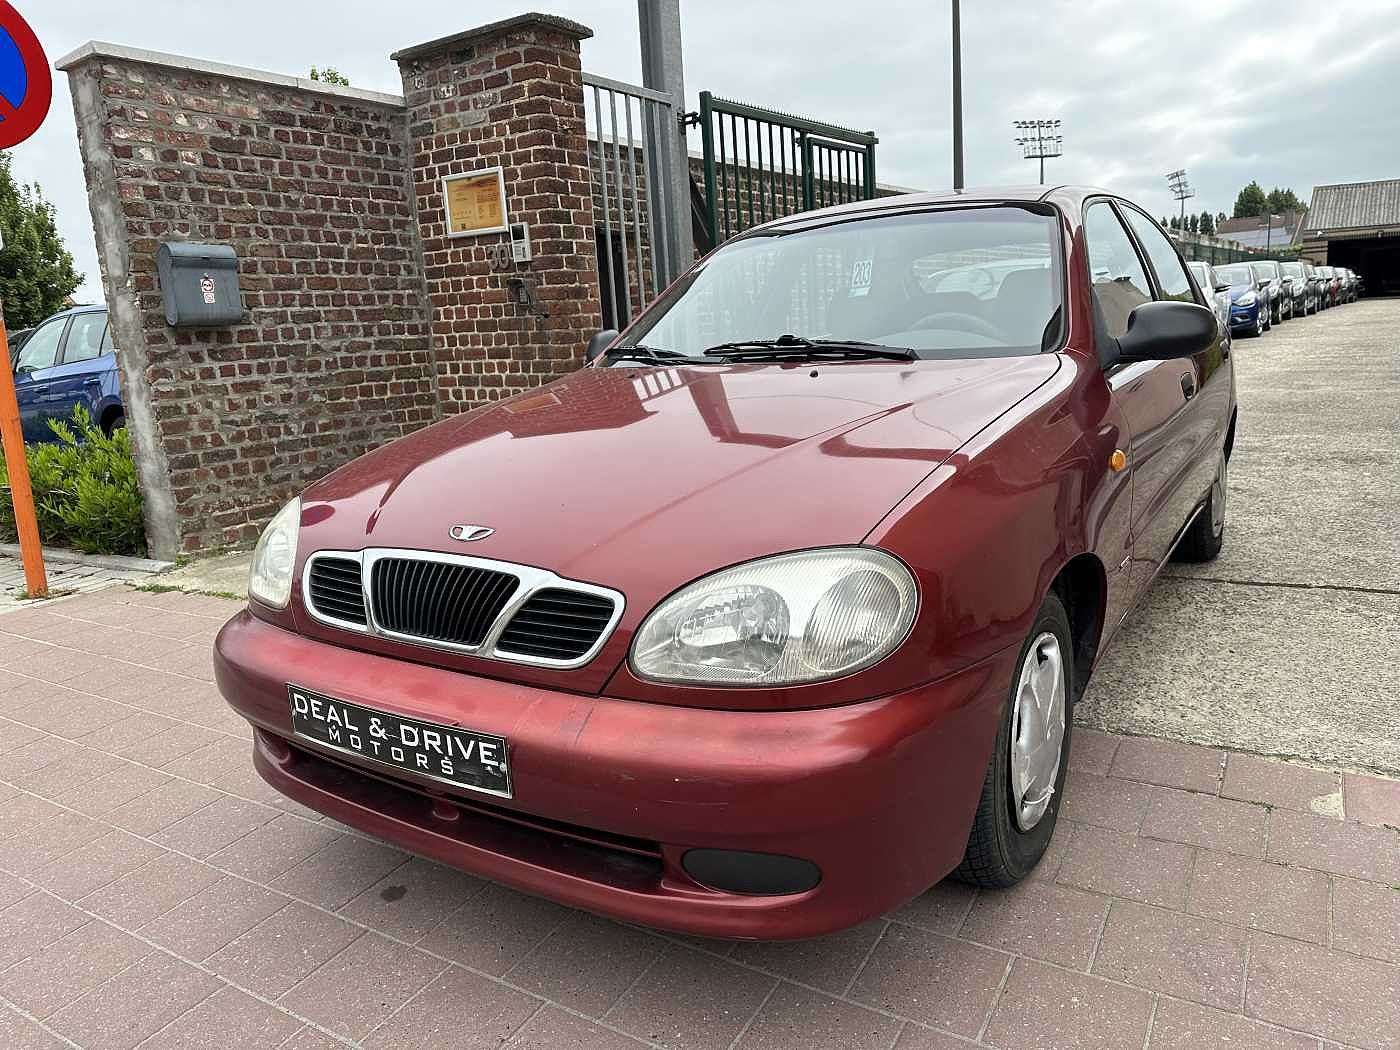 Daewoo Lanos Compact in Red used in Zaventem for € 1,699.-